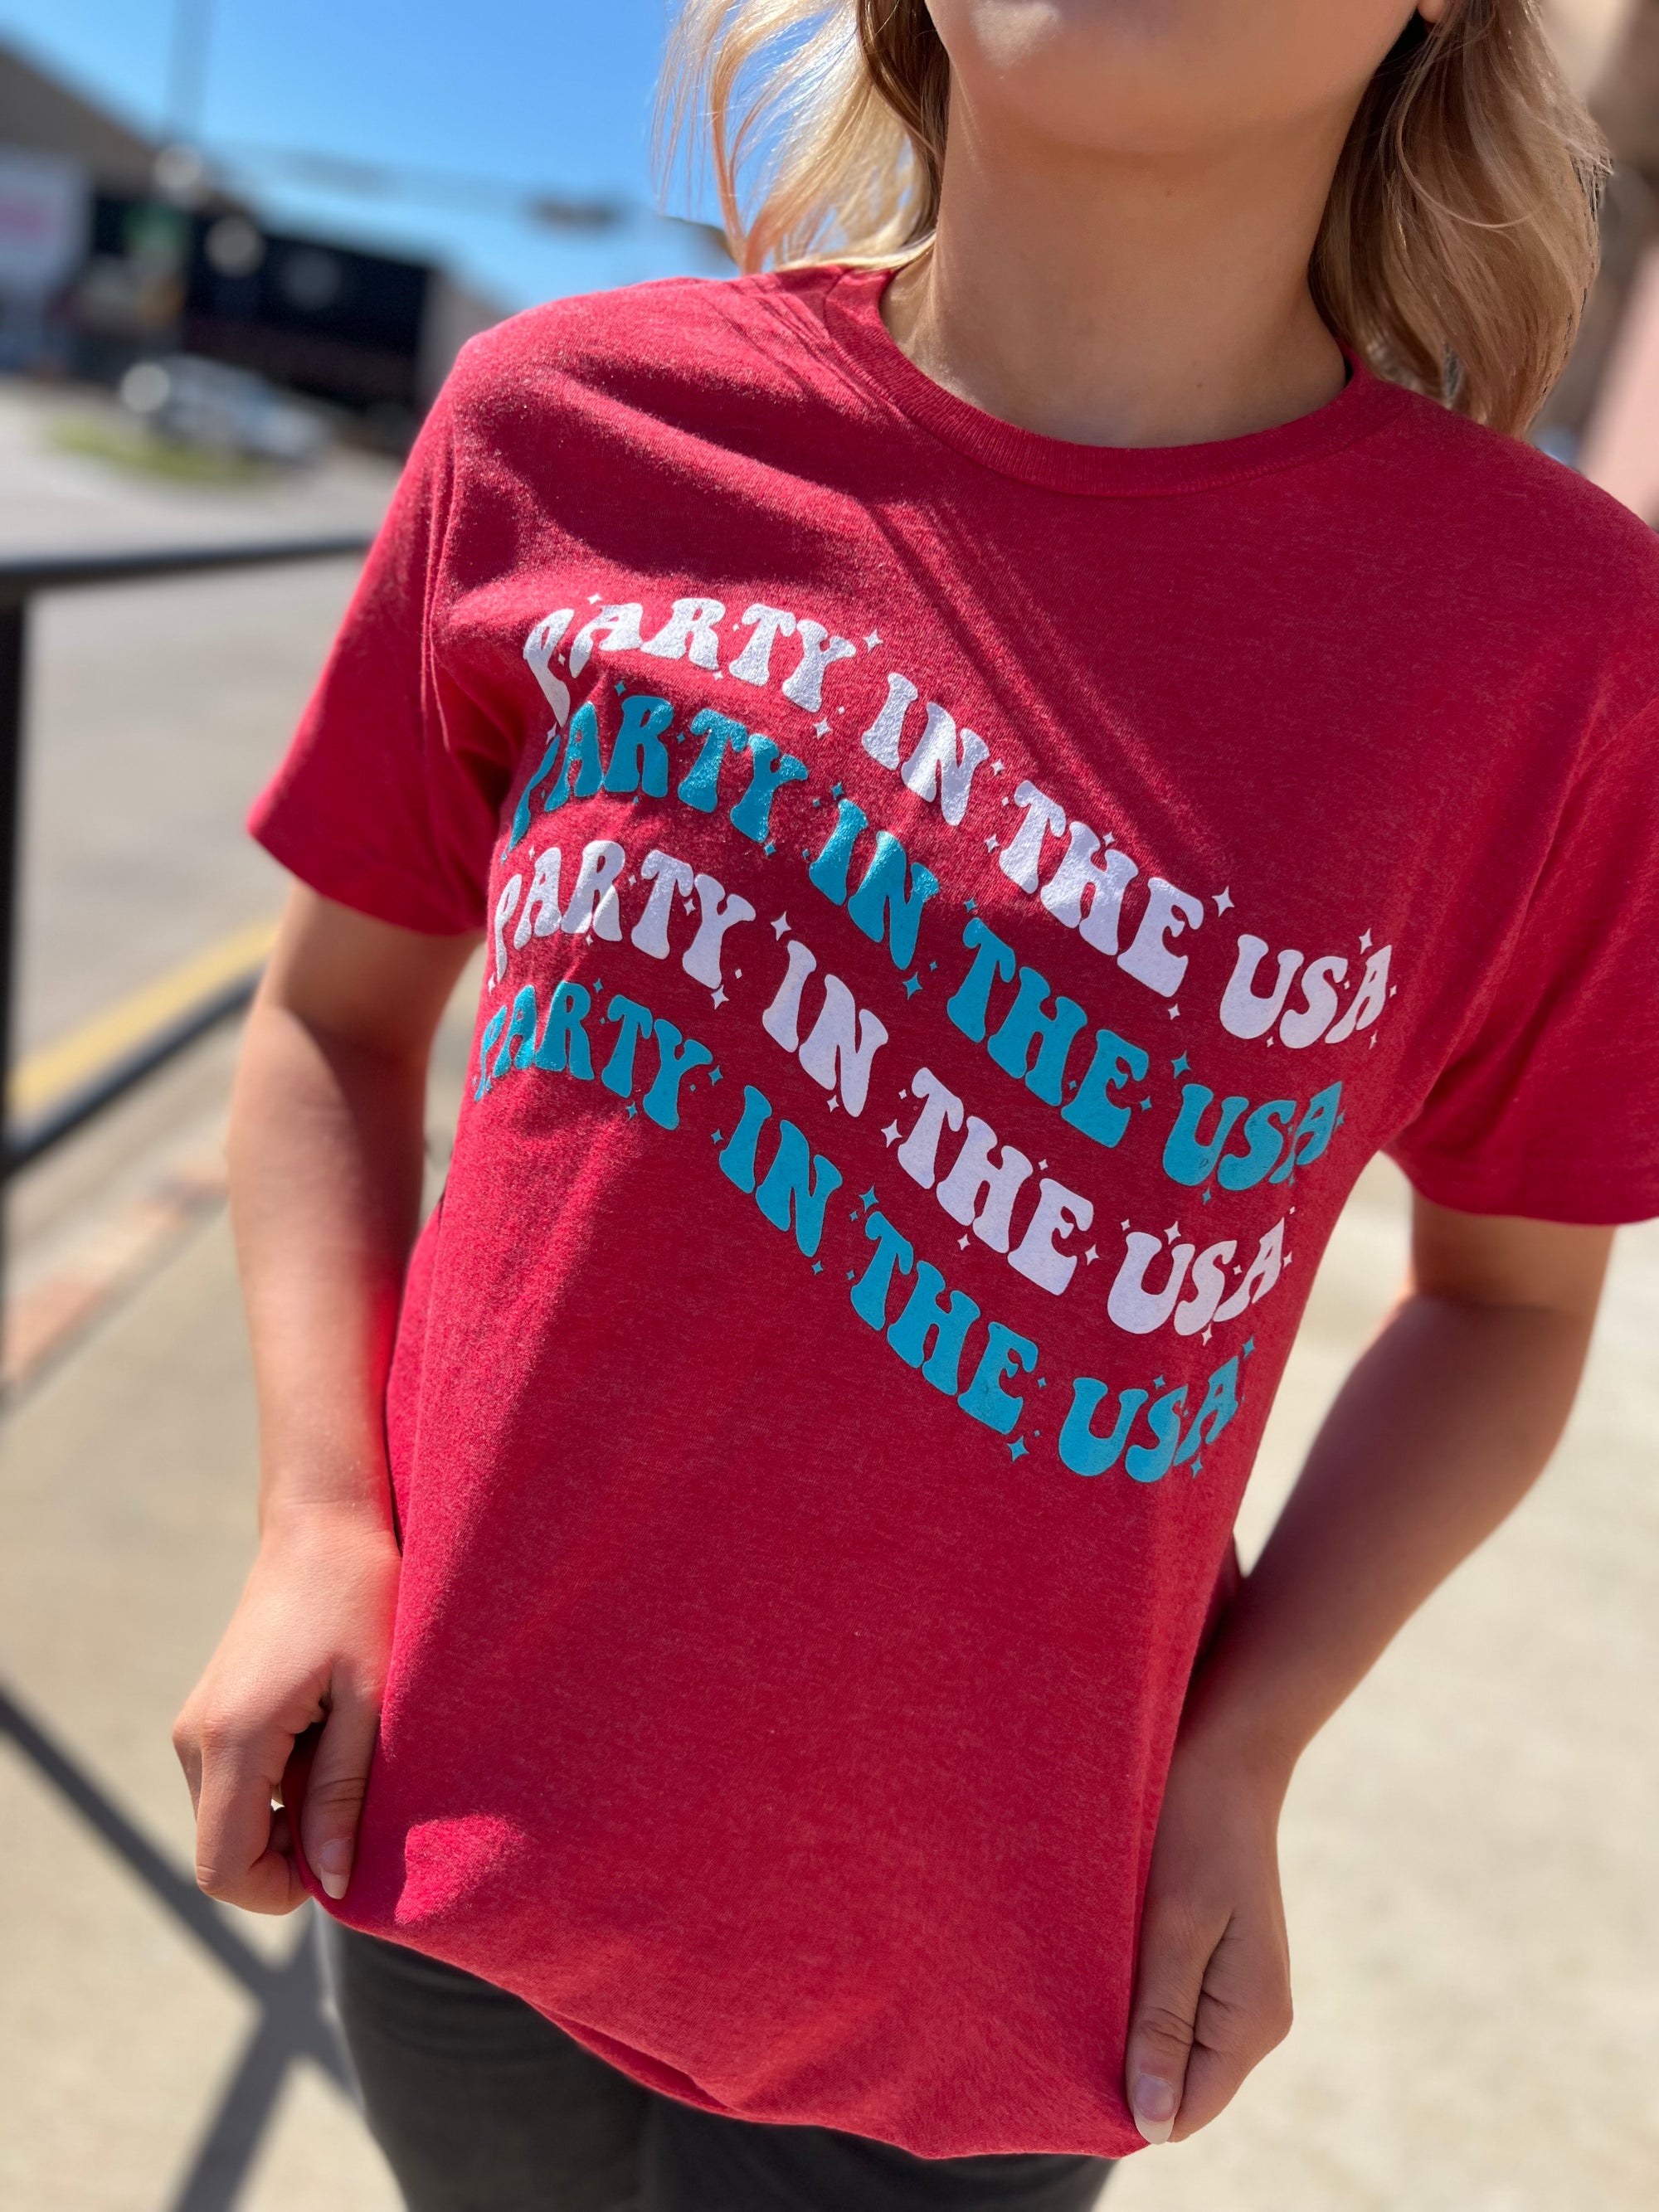 Graphic Tee - Retro Party in the USA